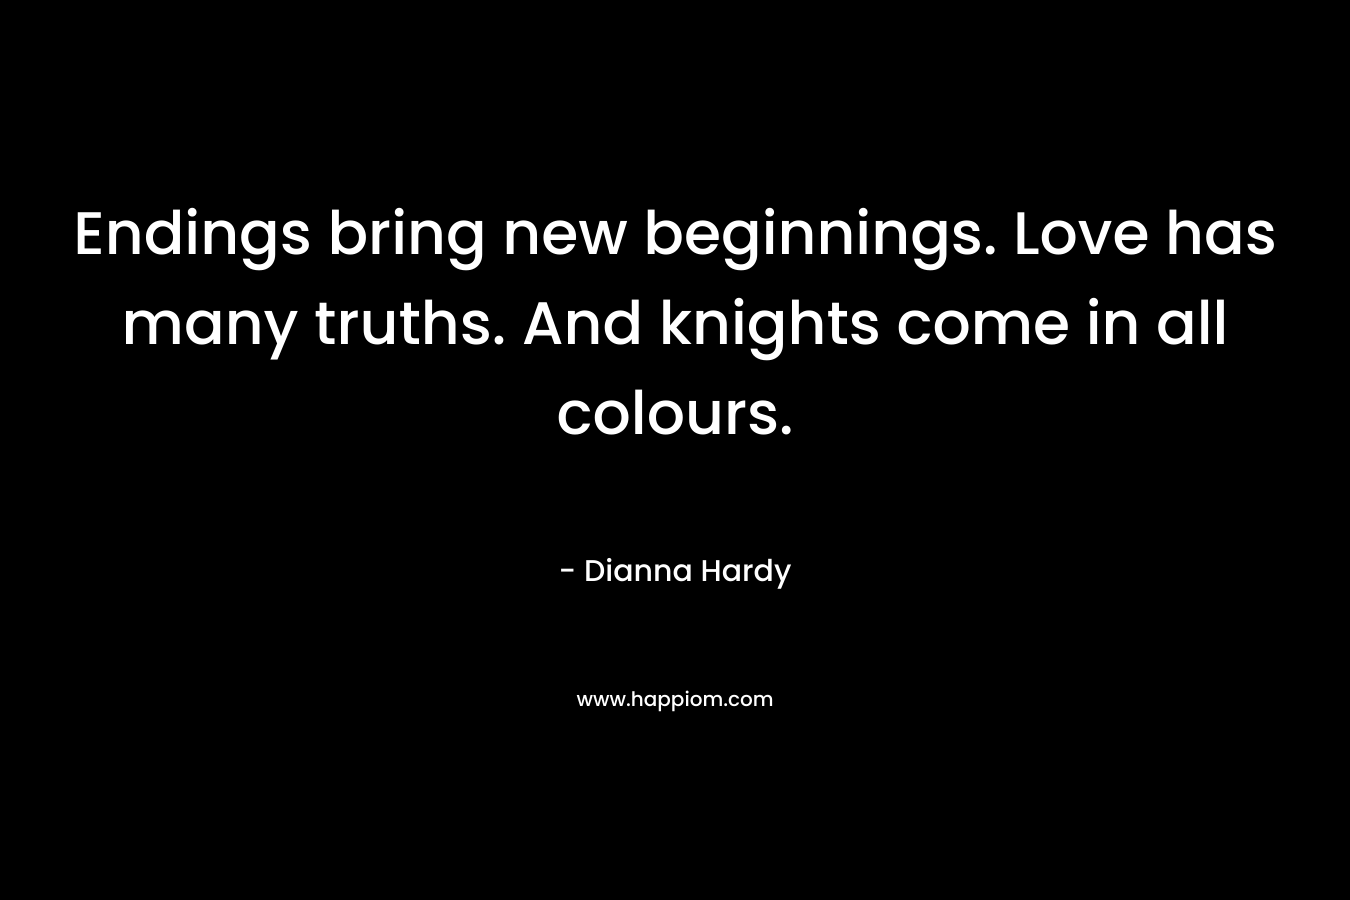 Endings bring new beginnings. Love has many truths. And knights come in all colours.